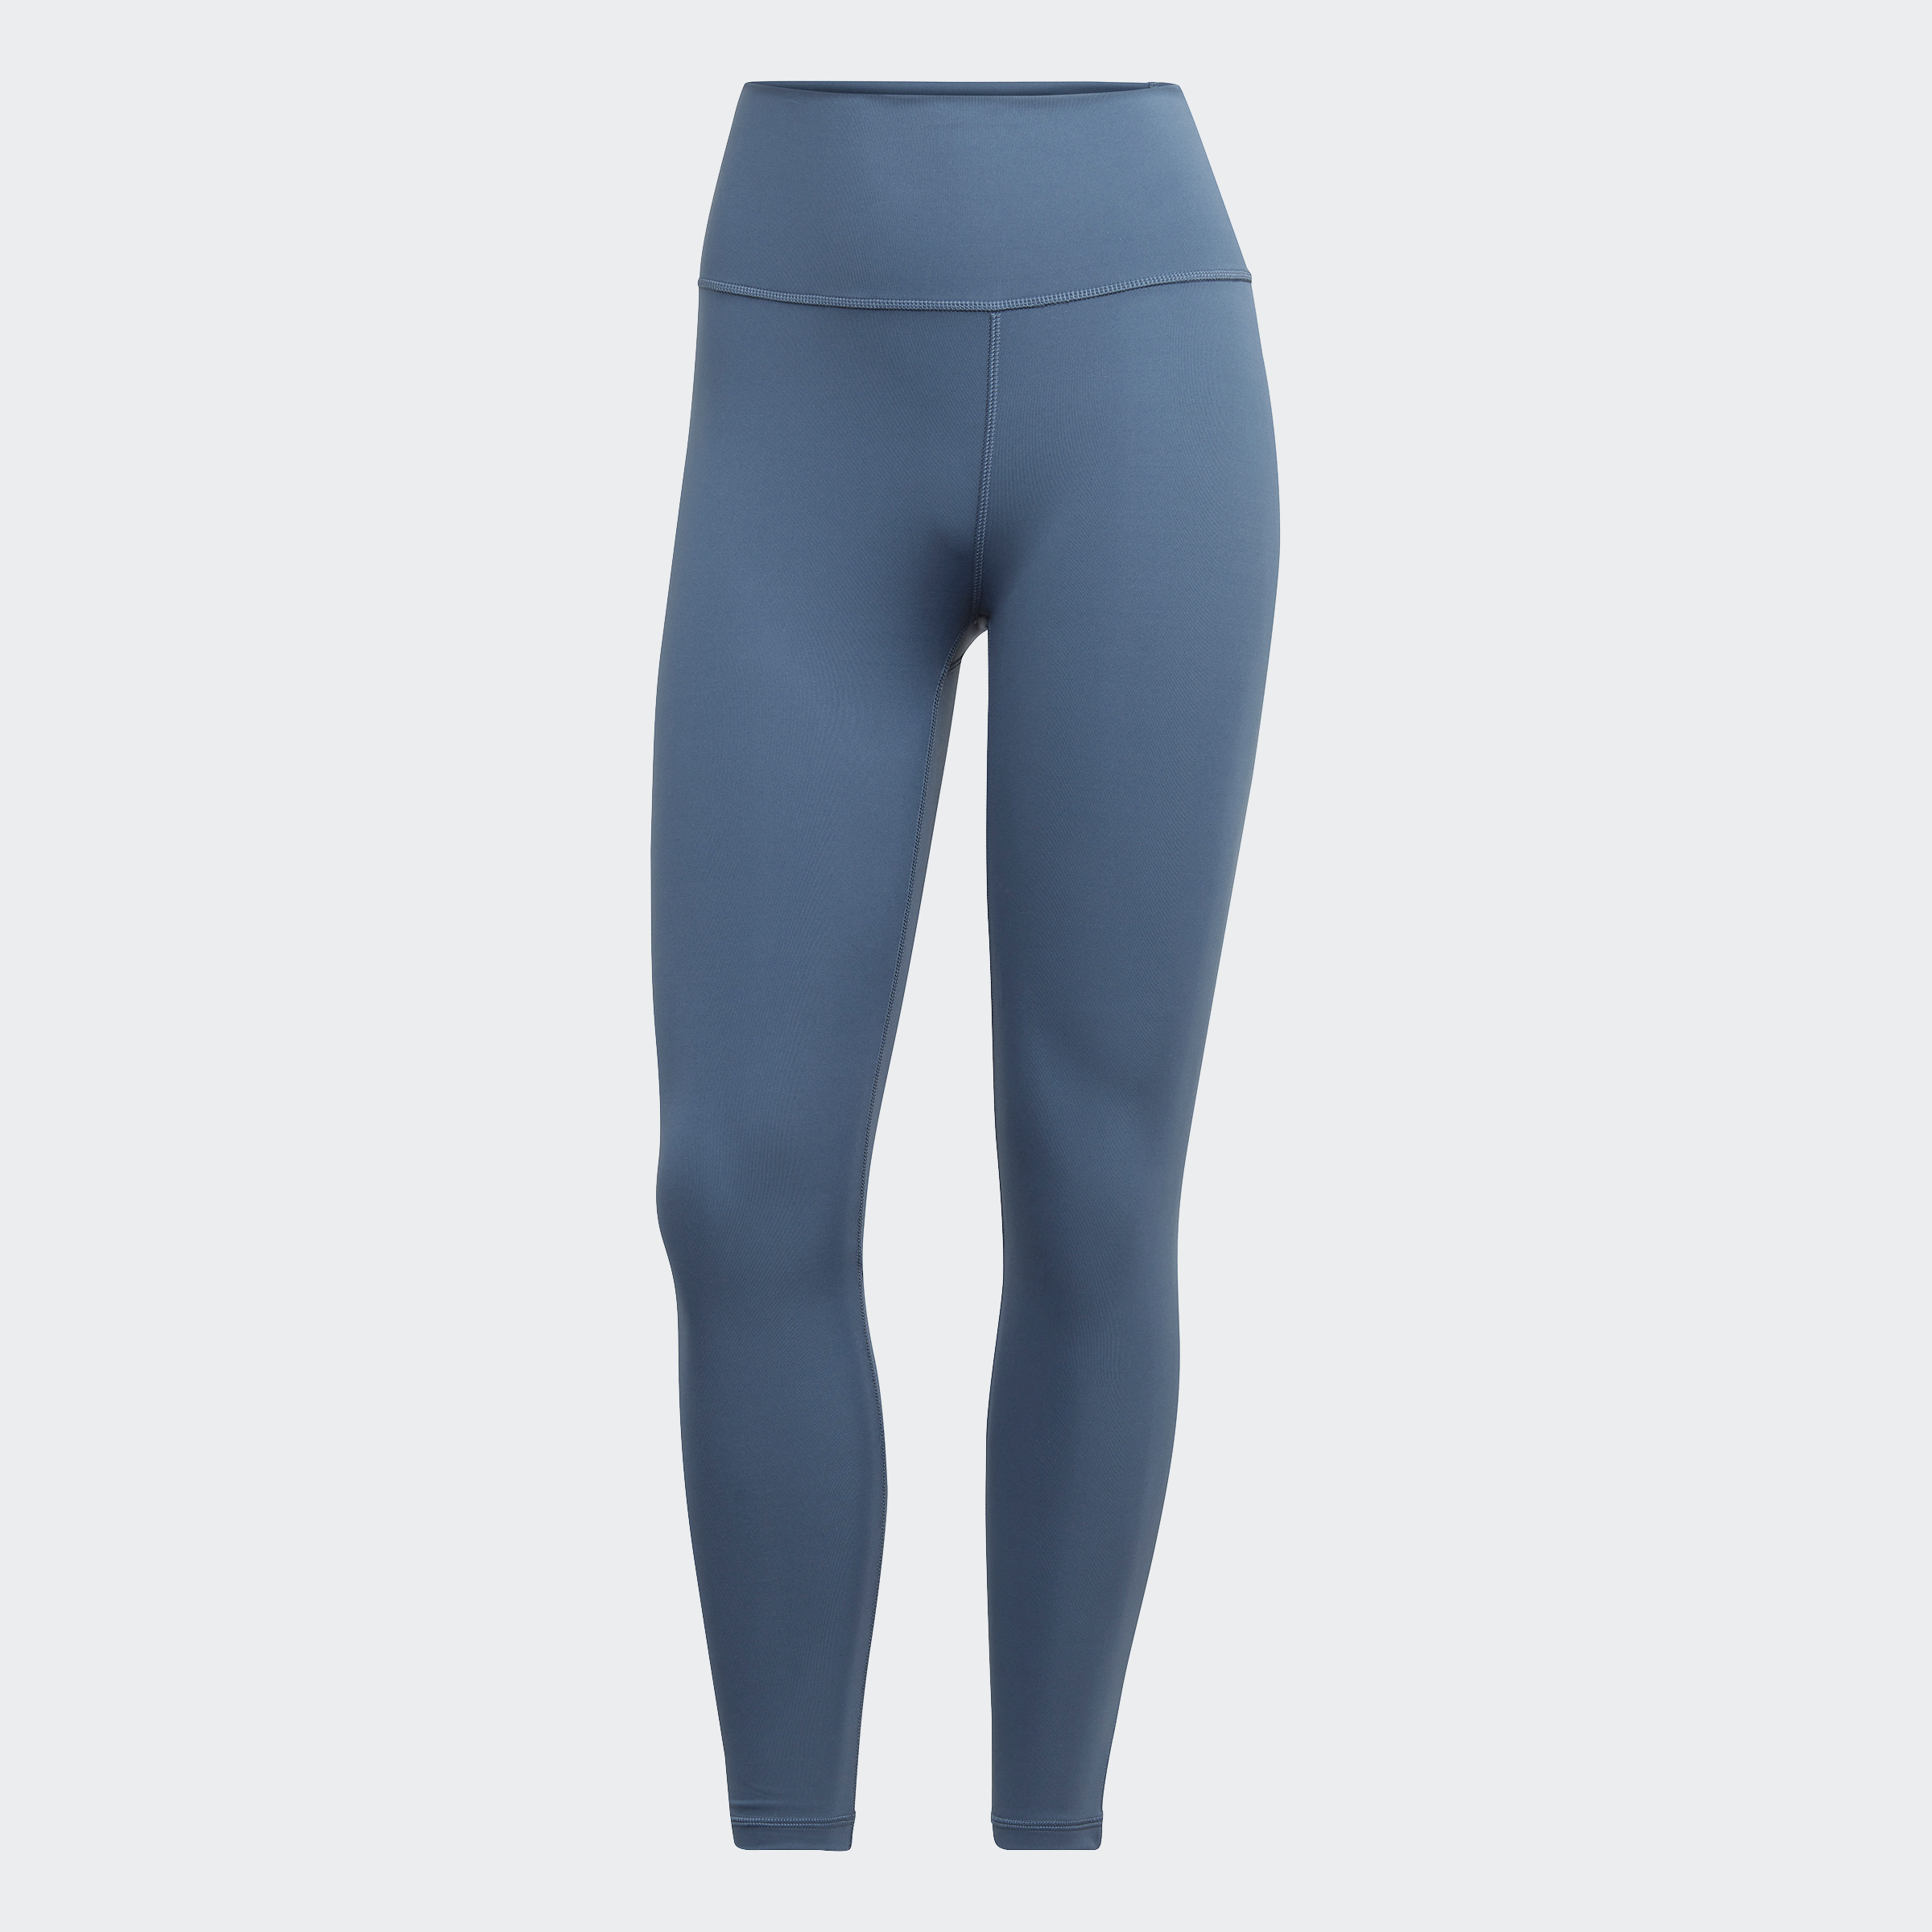 leggings adidas women - Buy leggings adidas women at Best Price in